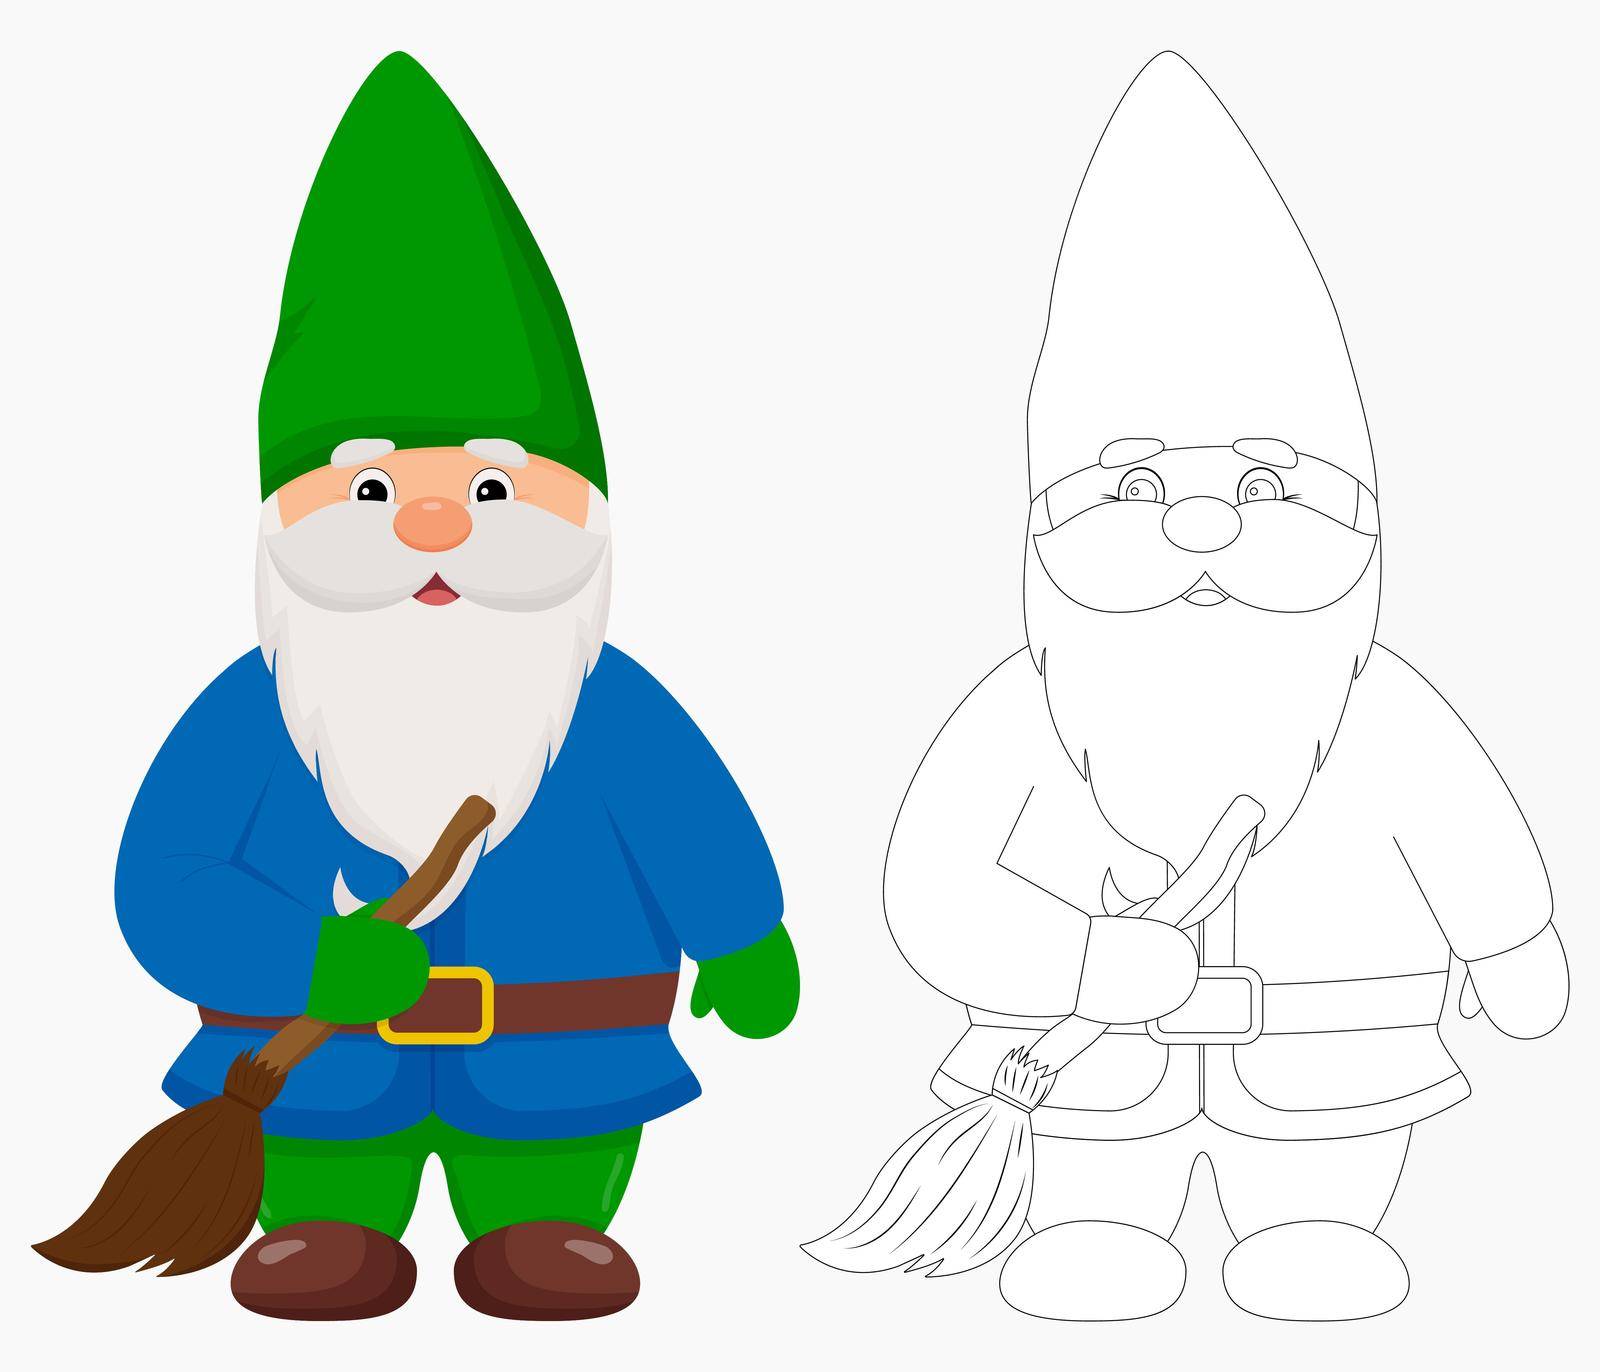 Cute garden gnome with a broom in his hands. Gnome in color and outline. by anna_orlova